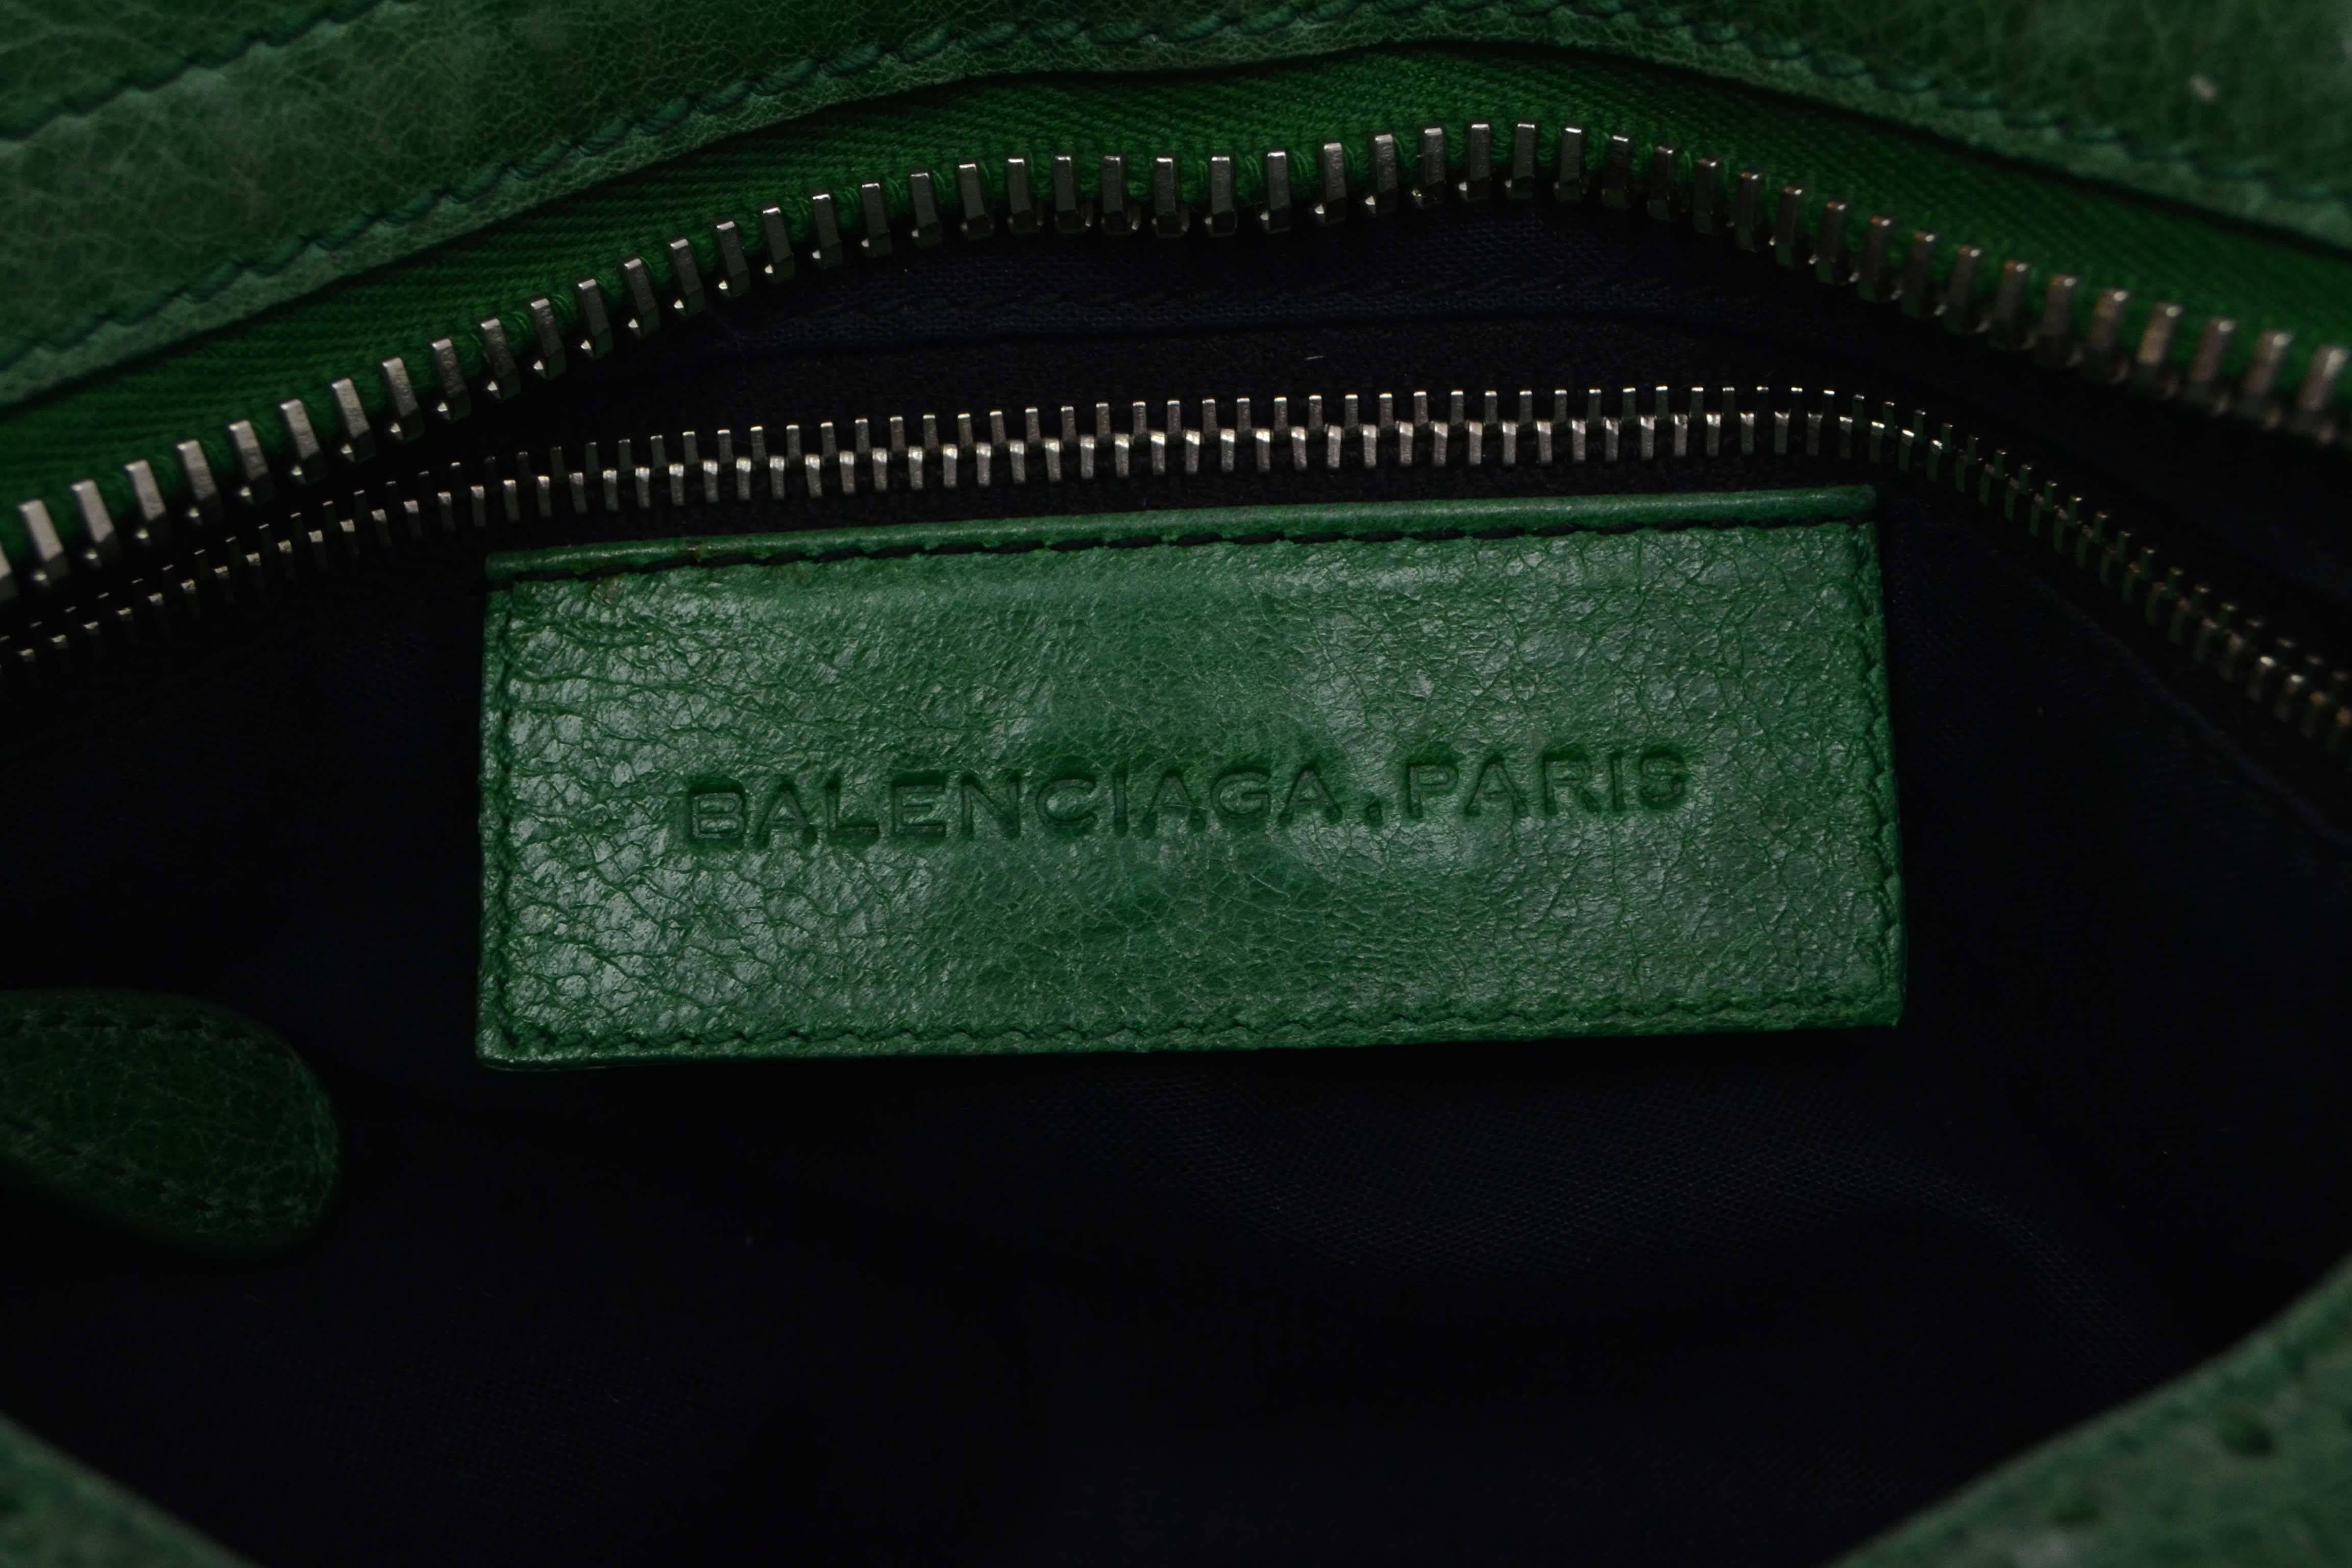 Women's Balenciaga Green Leather Giant Brogues Covered Motorcycle City Bag rt. $2, 045